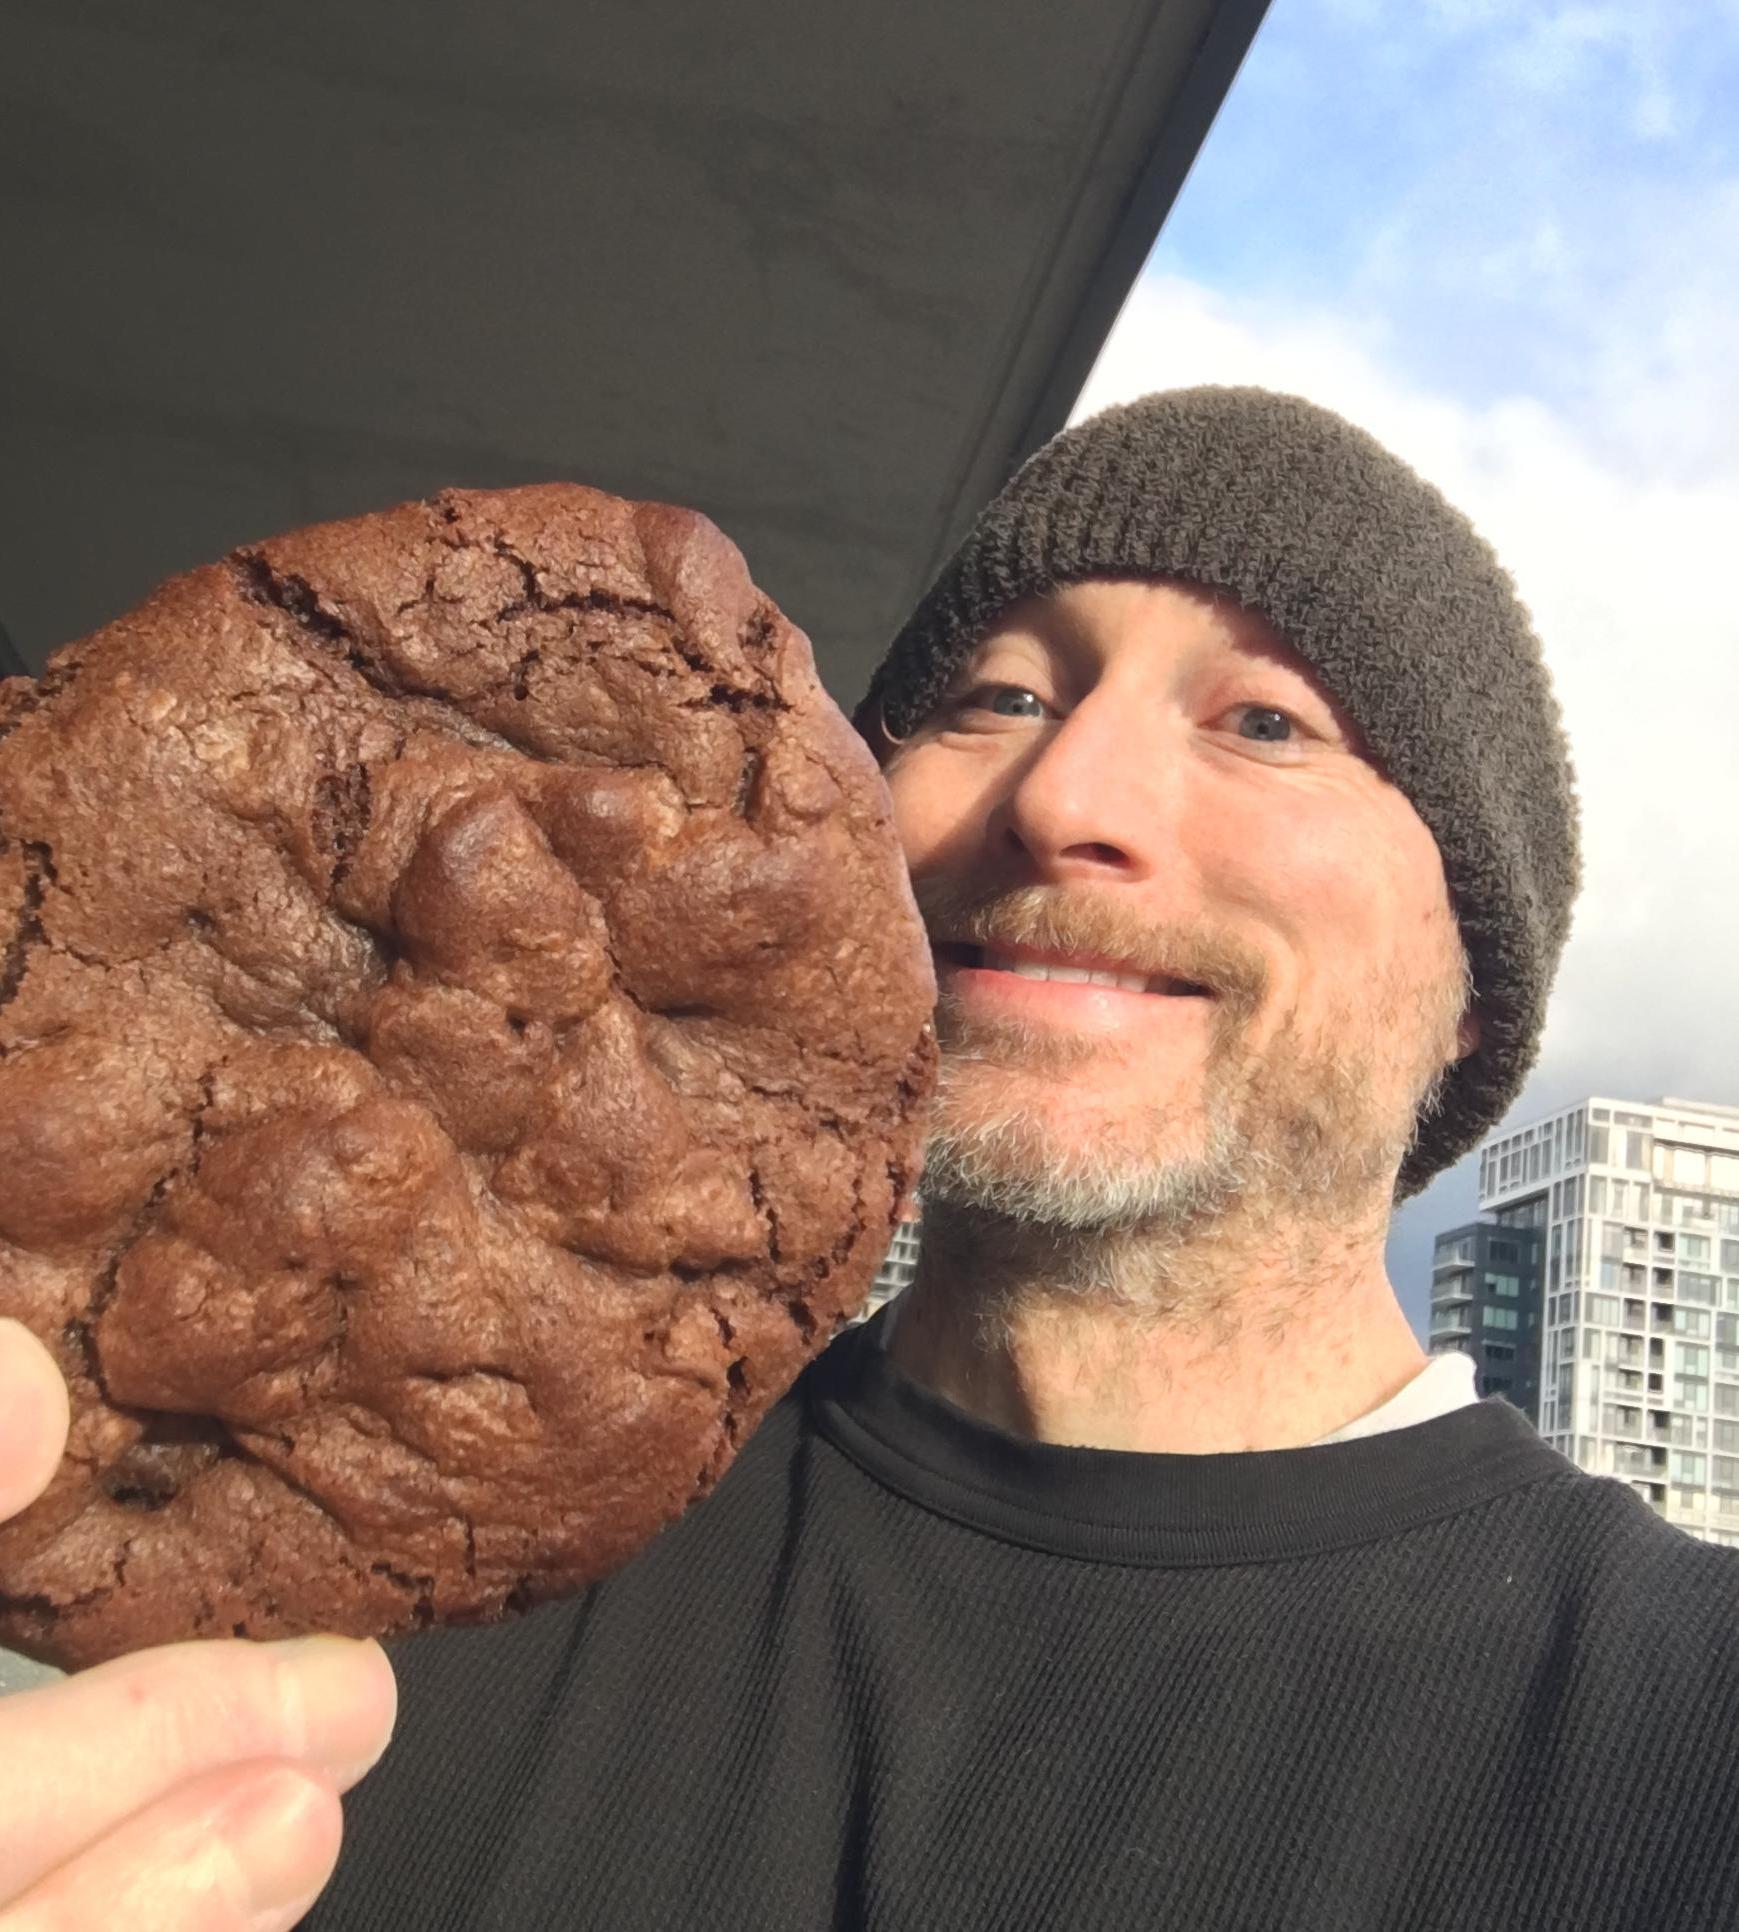 The World's Greatest Nutella Cookies!